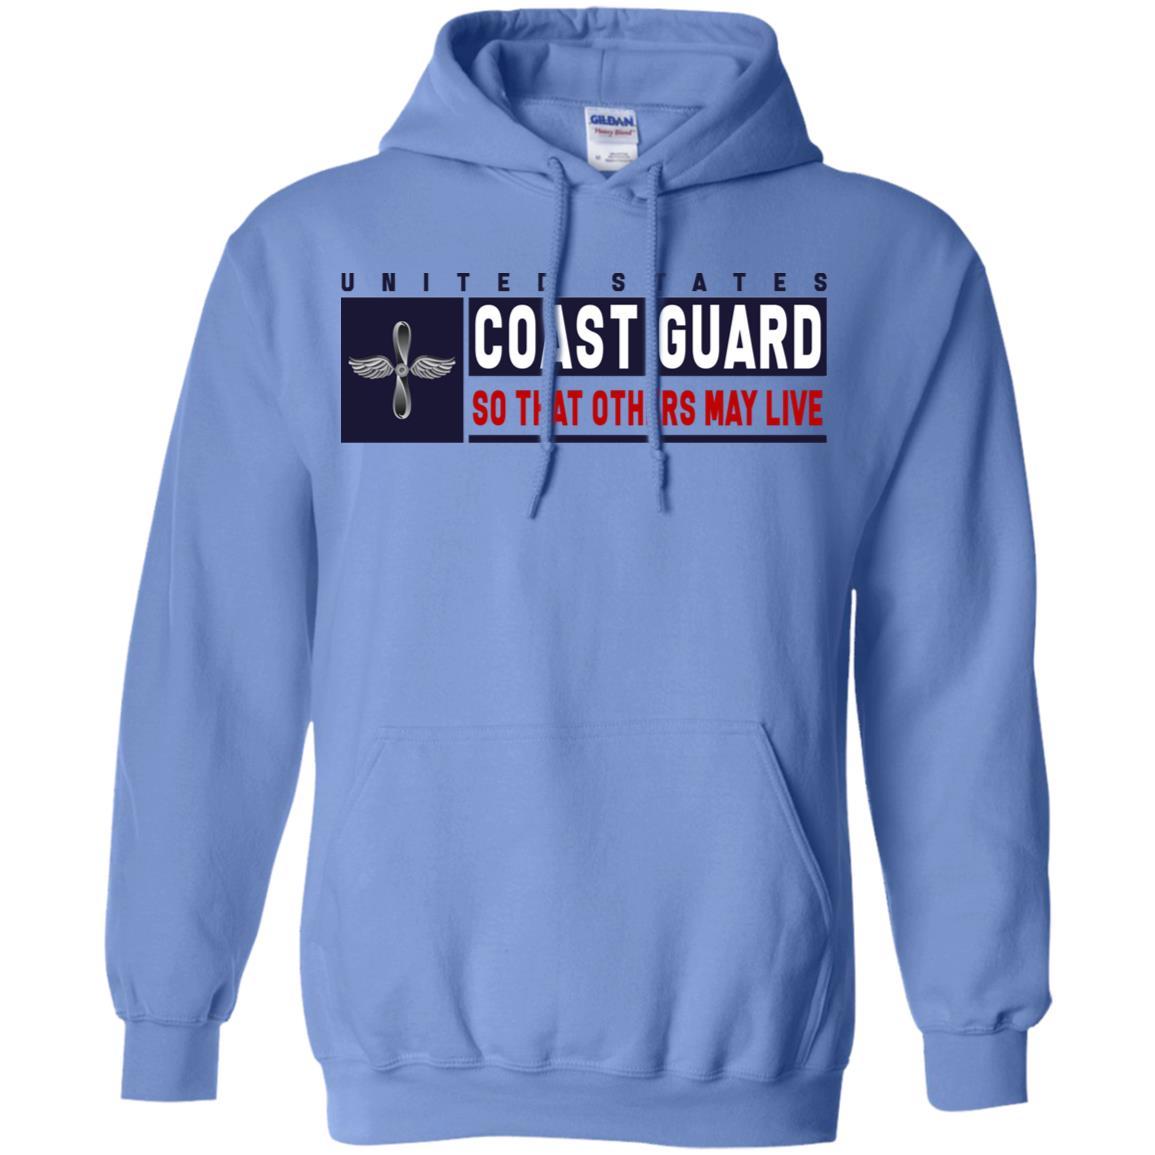 US Coast Guard Aviation Maintenance Technician AMT Logo- So that others may live Long Sleeve - Pullover Hoodie-TShirt-USCG-Veterans Nation